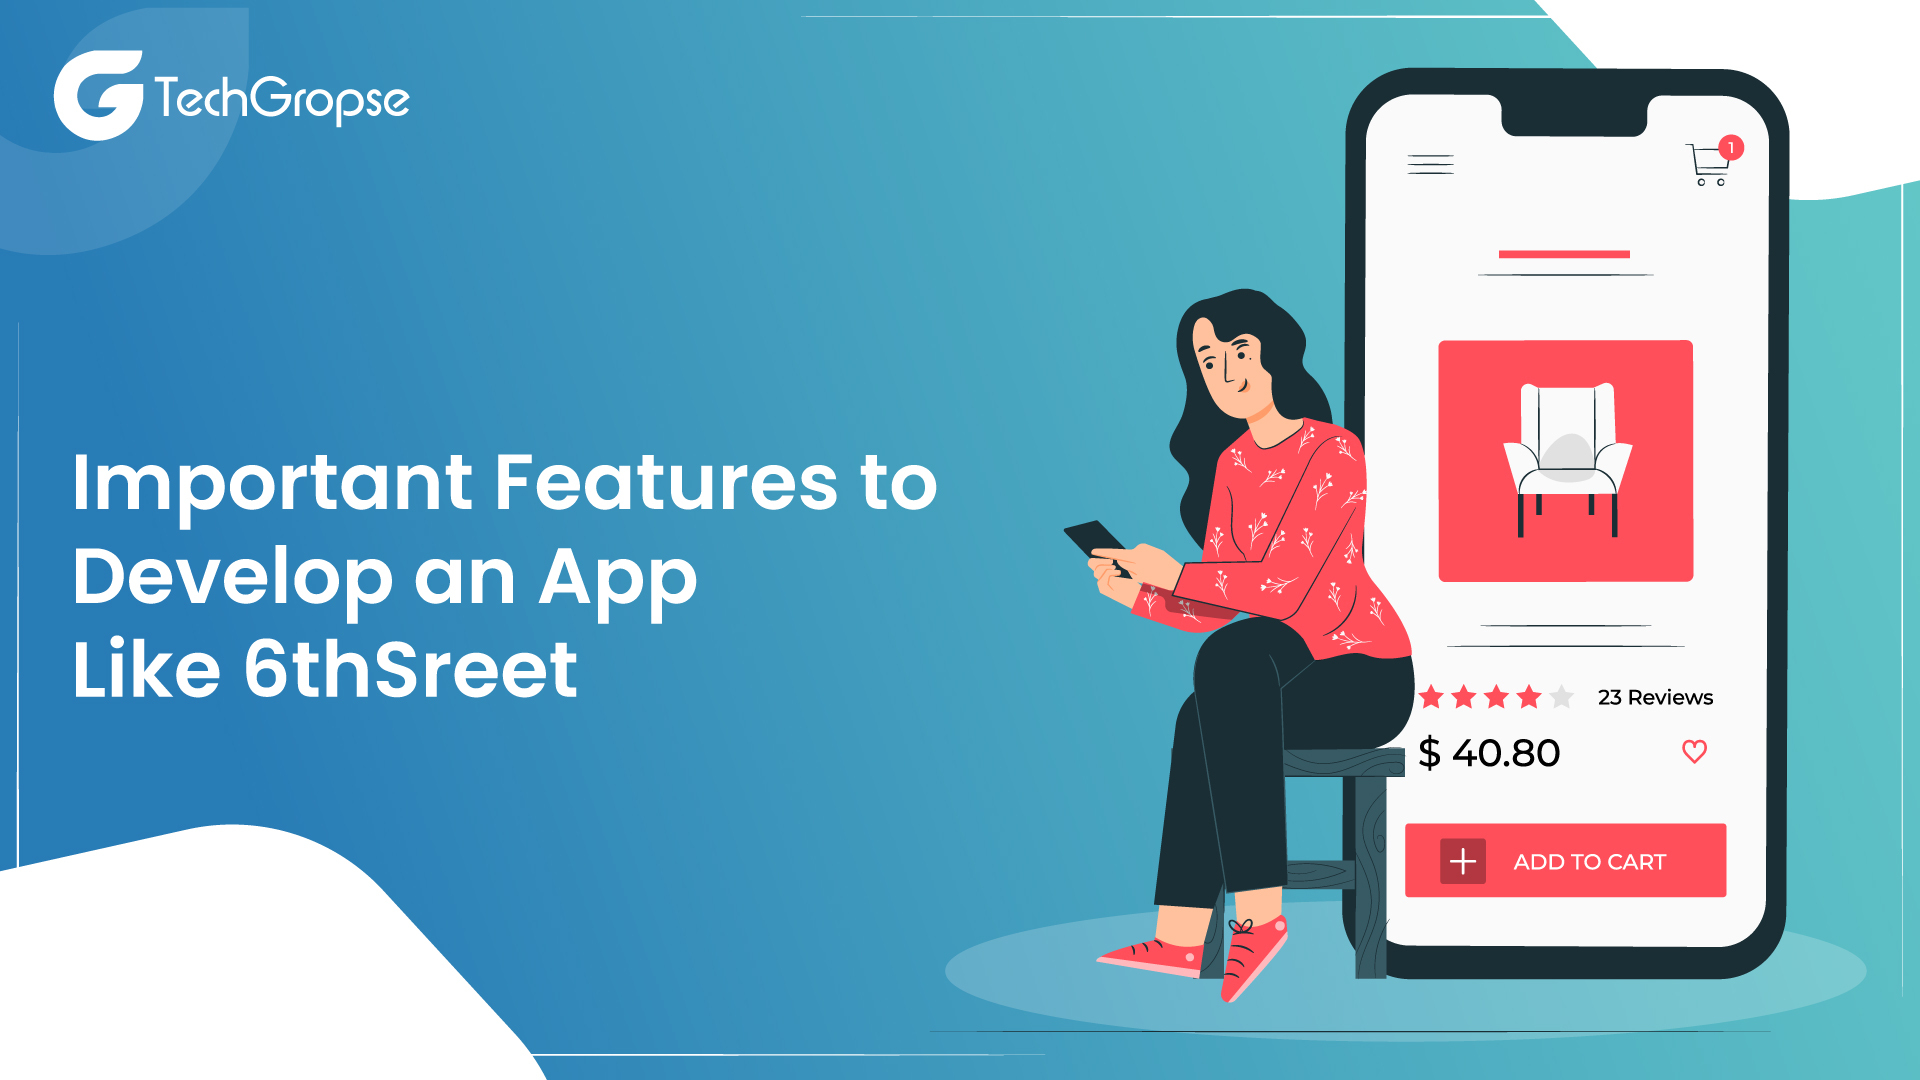 Important Features to Develop an App Like 6thSreet